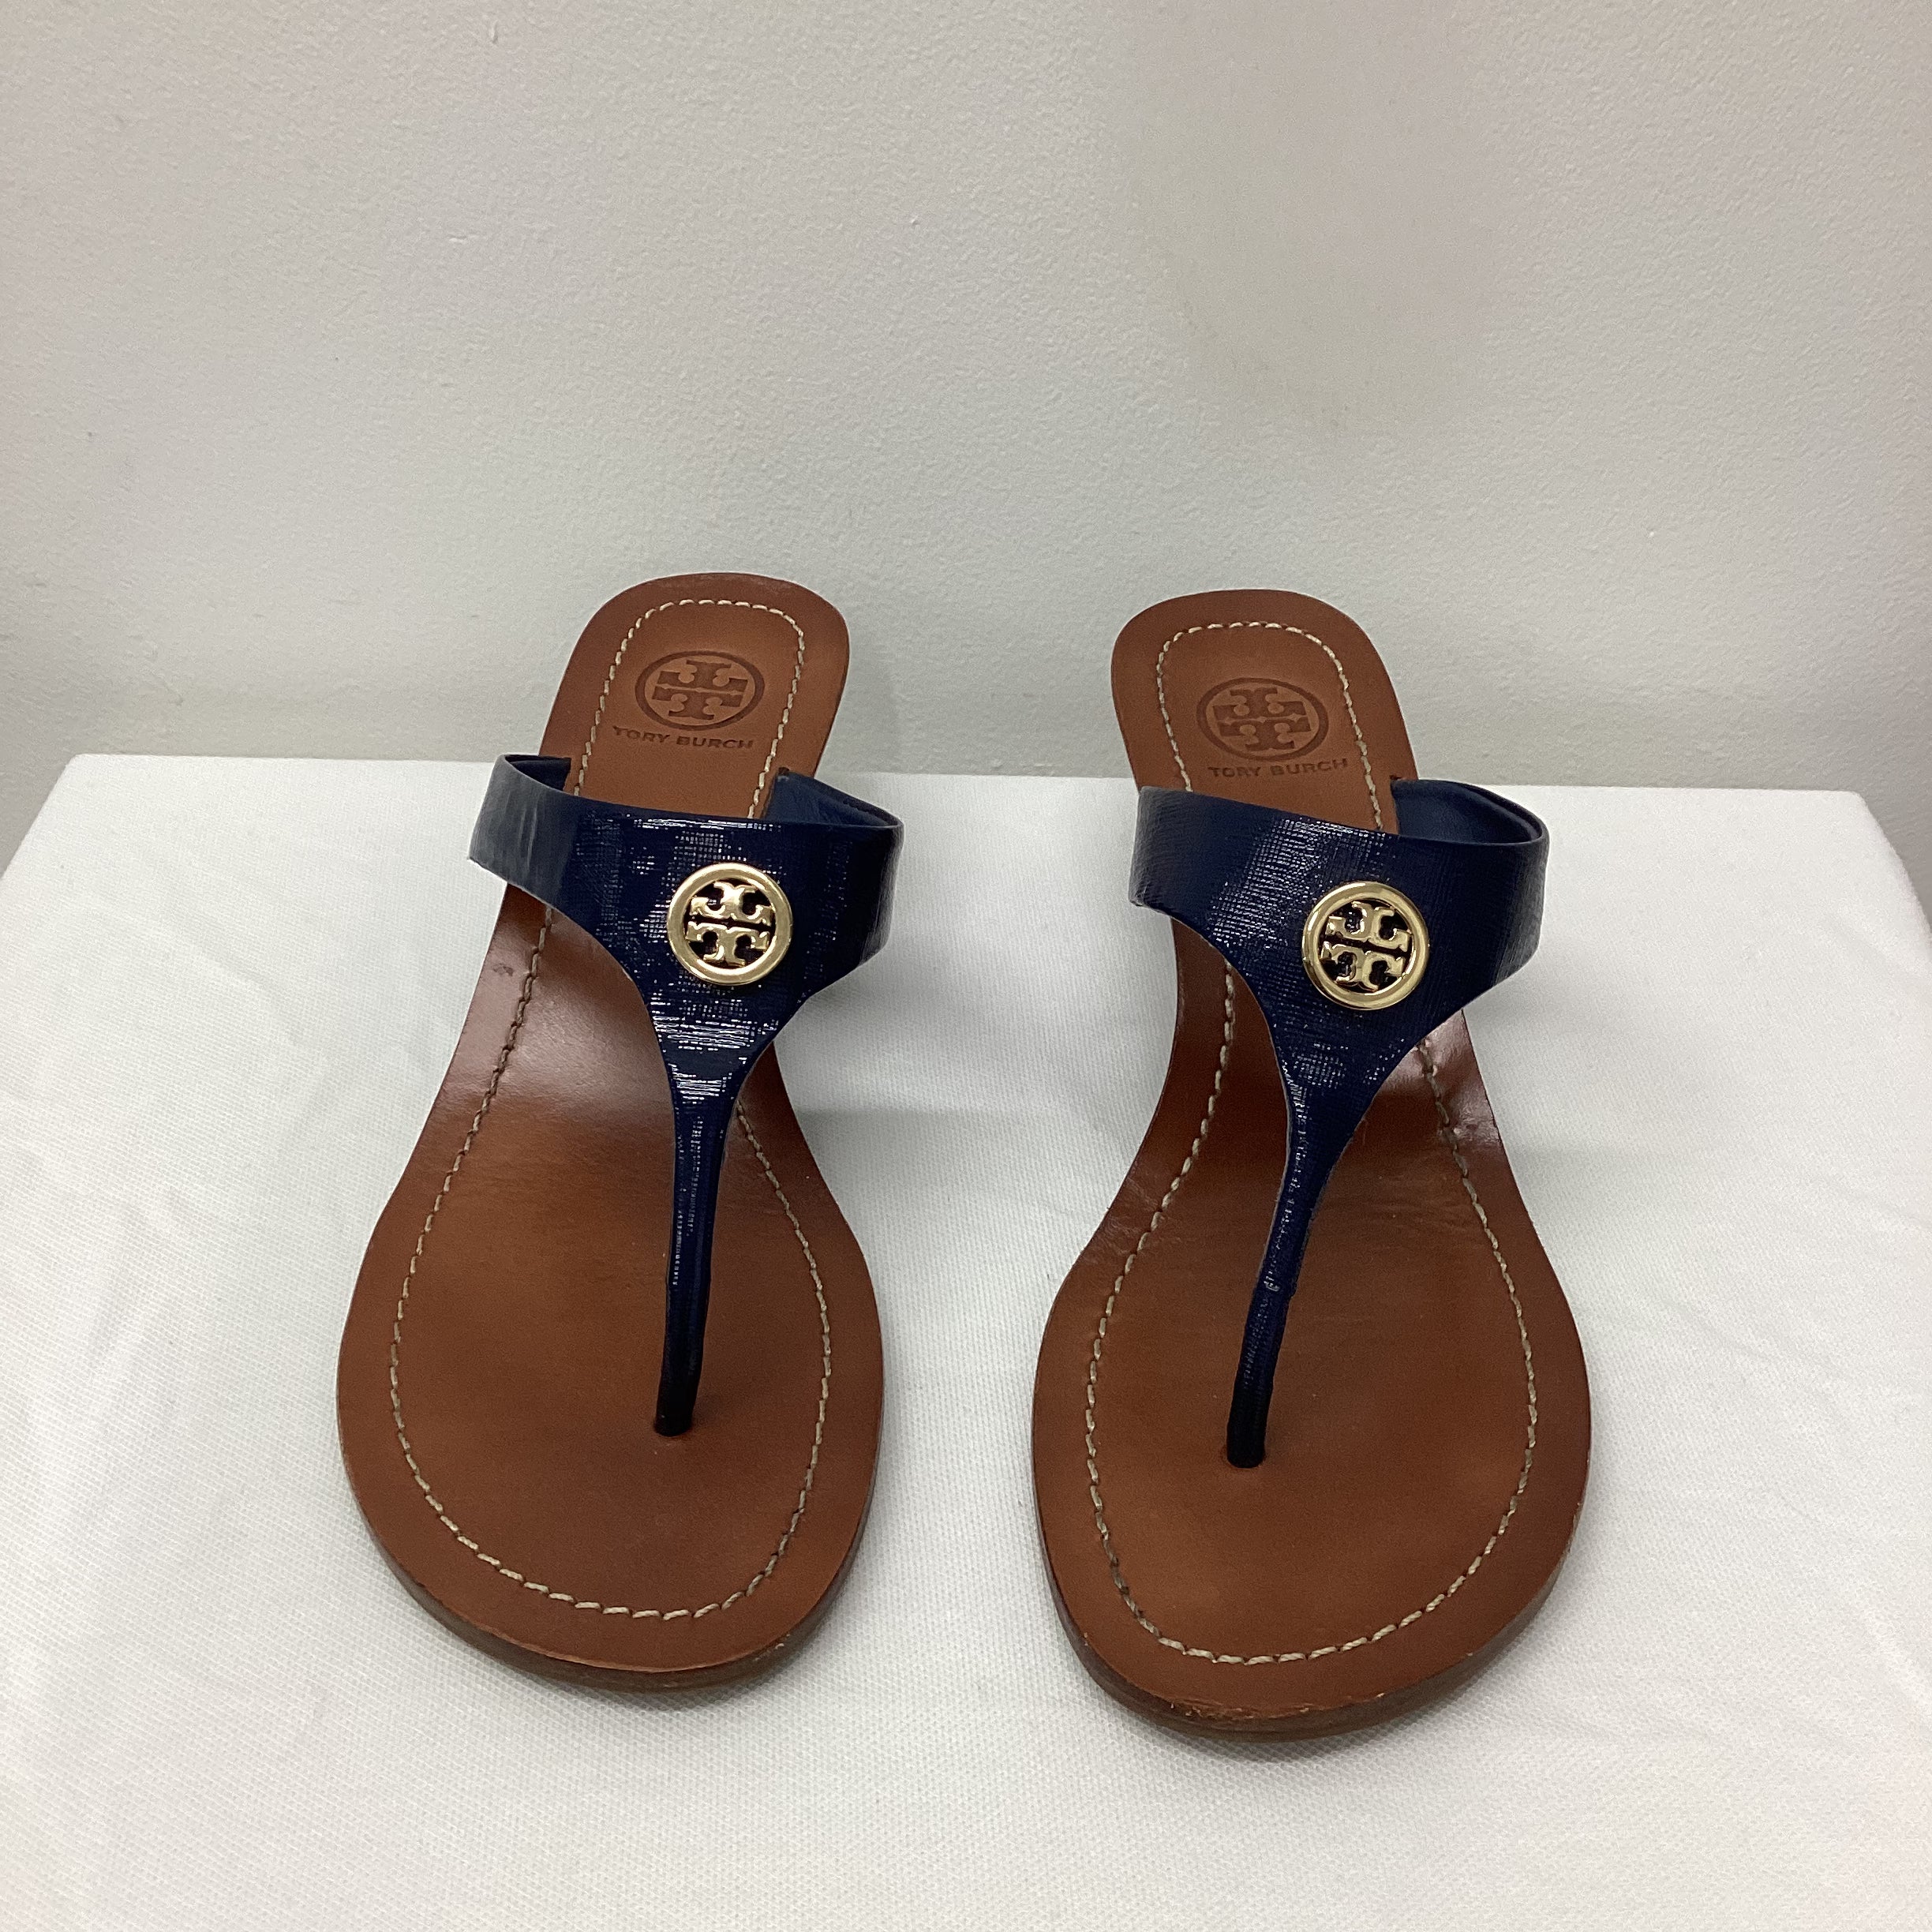 Tory Burch Leather Wedge Sandals Navy Gold Hardware 12148230 (Very Goo –  Shop for Shelter